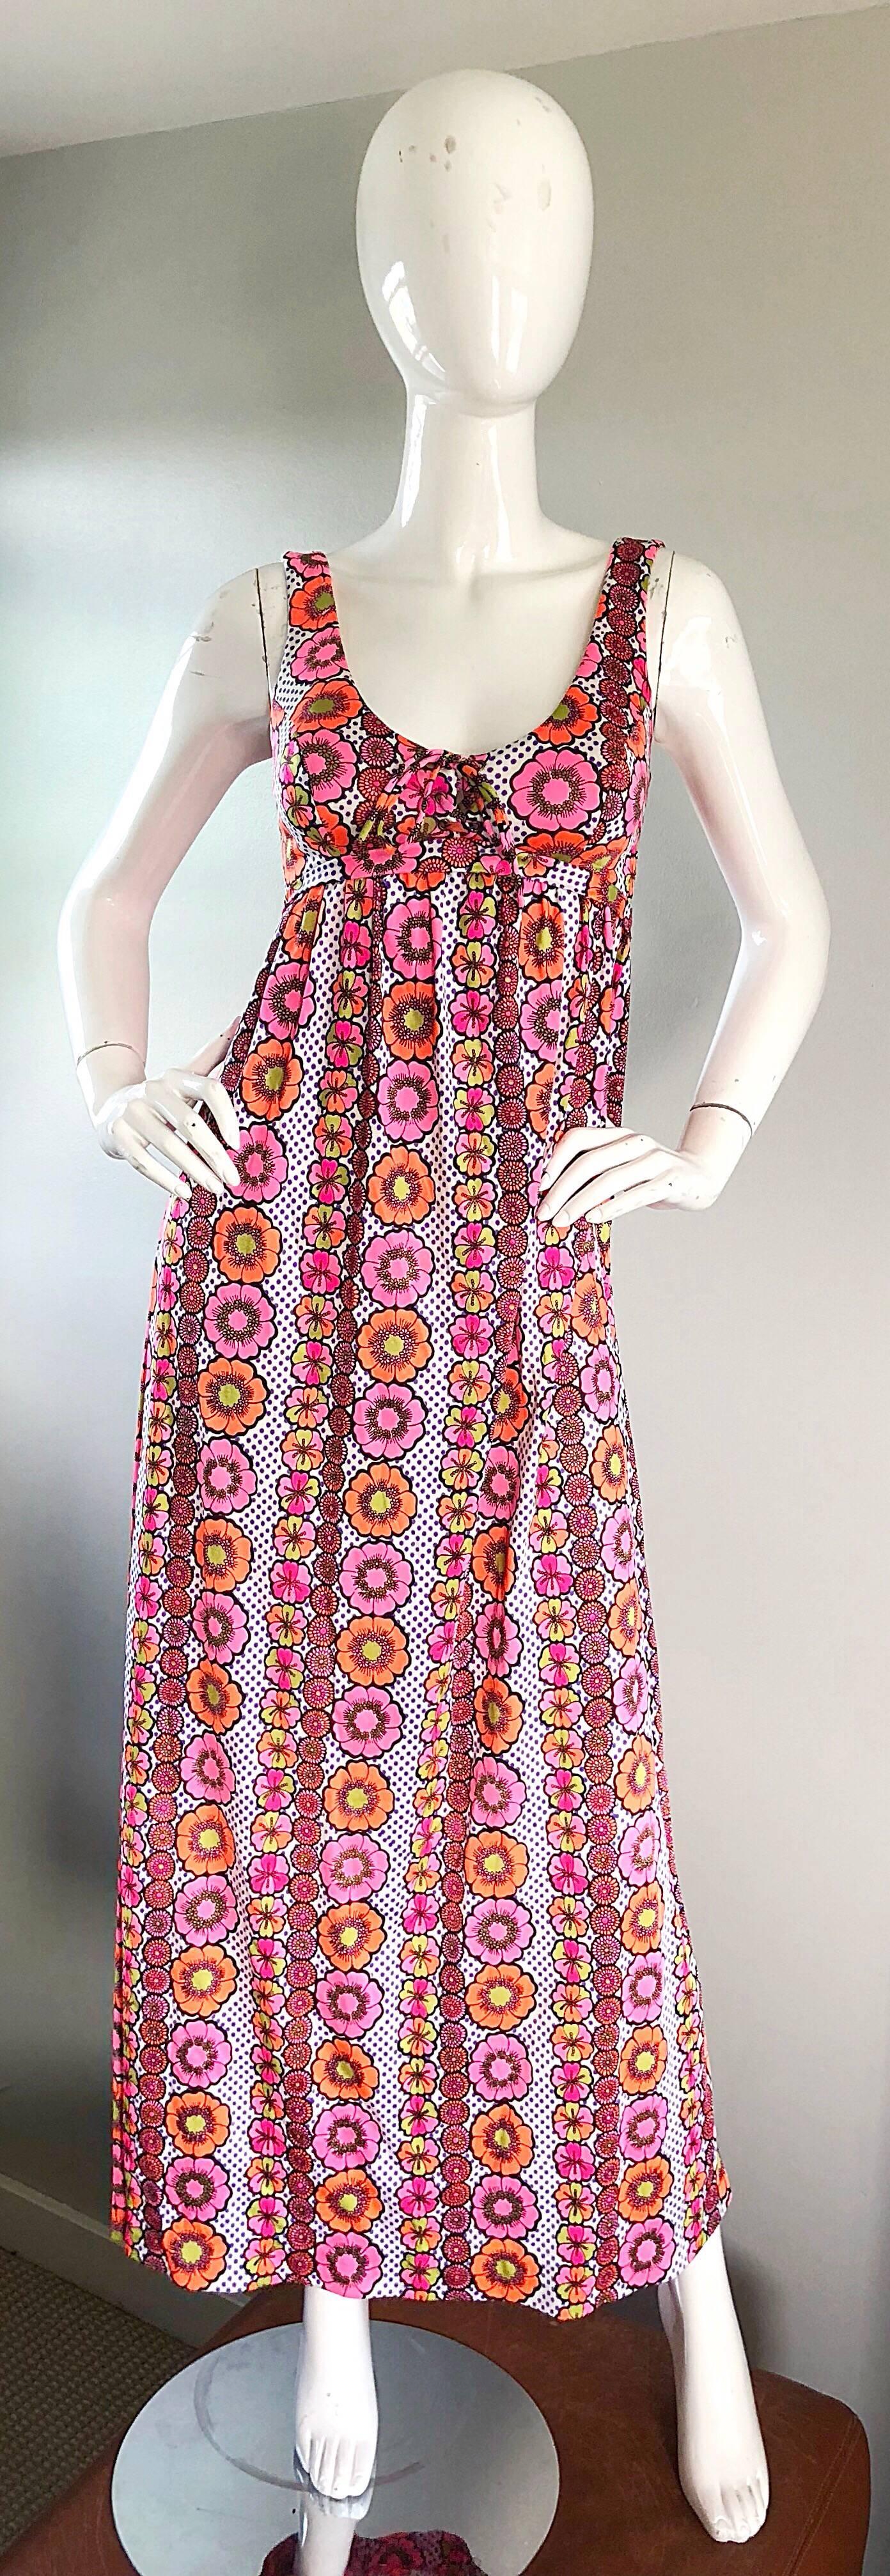 Awesome vintage SIRENA OF CALIFORNIA hot pink, orange, fuchsia, yellow, purple and navy blue boho maxi dress! Features a lace-up bodice that can adjust to fit an array of bust sizes. Hibiscus flower prints, mixed with purple and white polka dots.